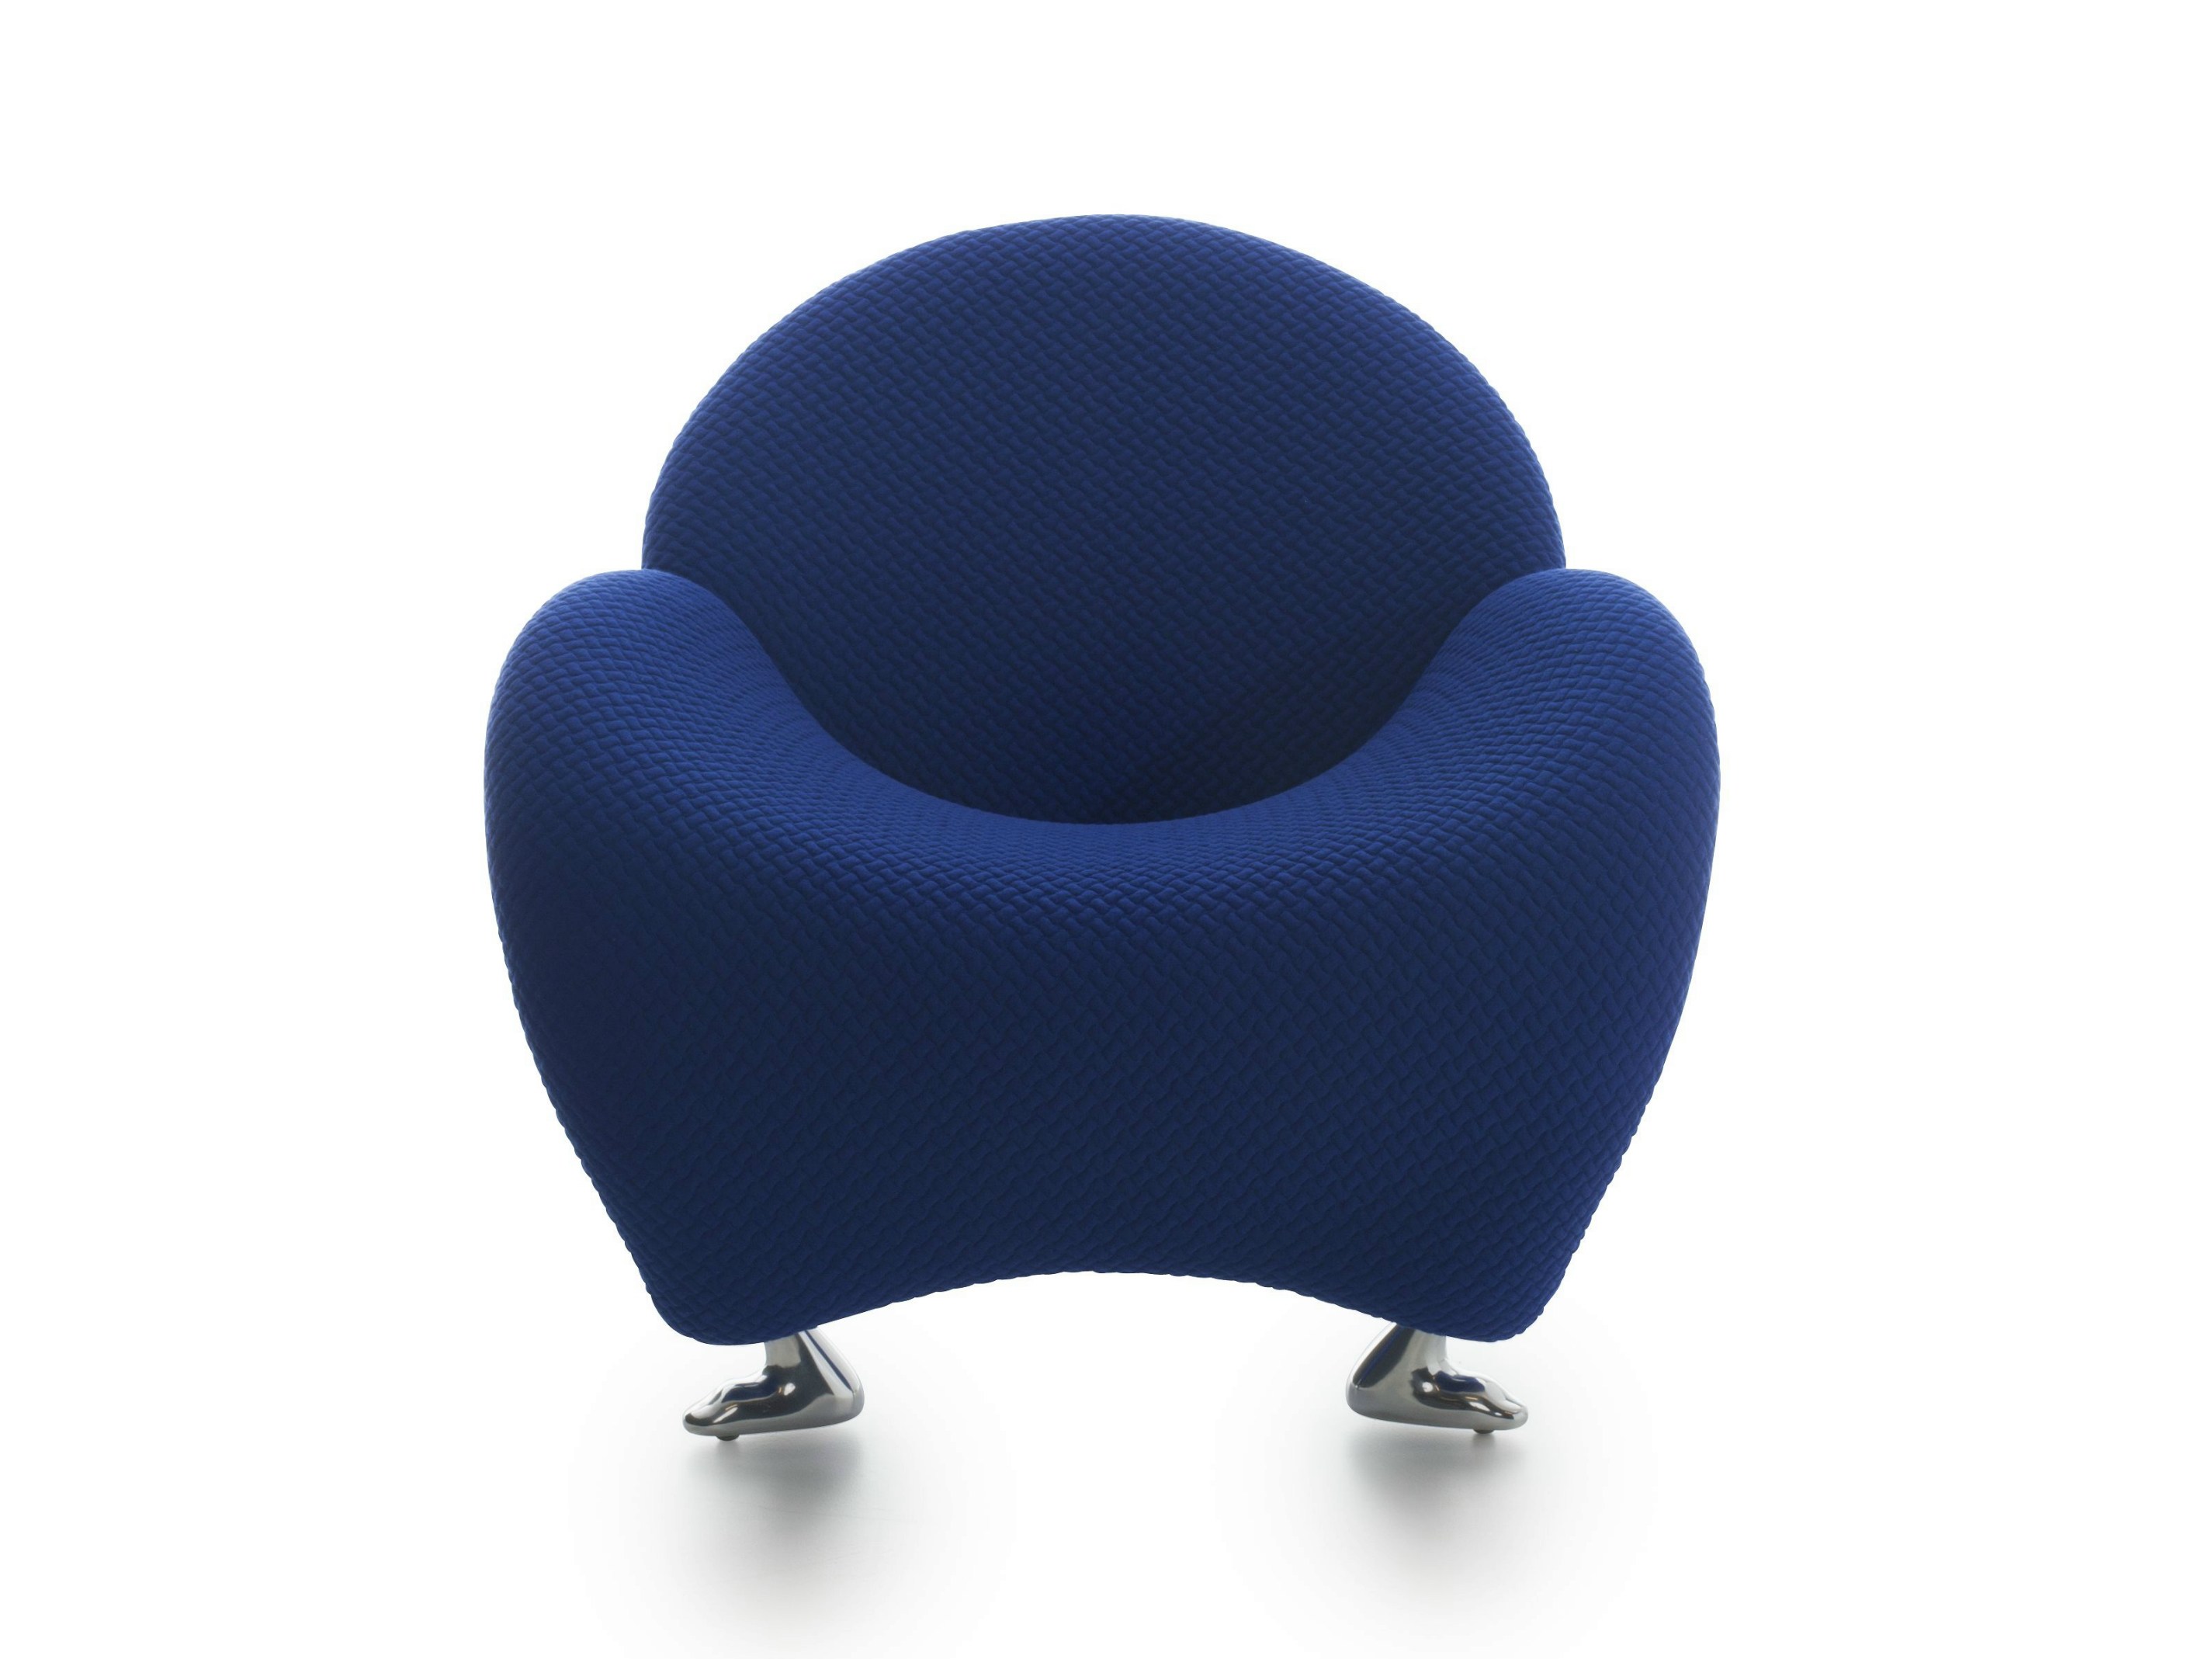 Papageno Lounge Chair by Leolux